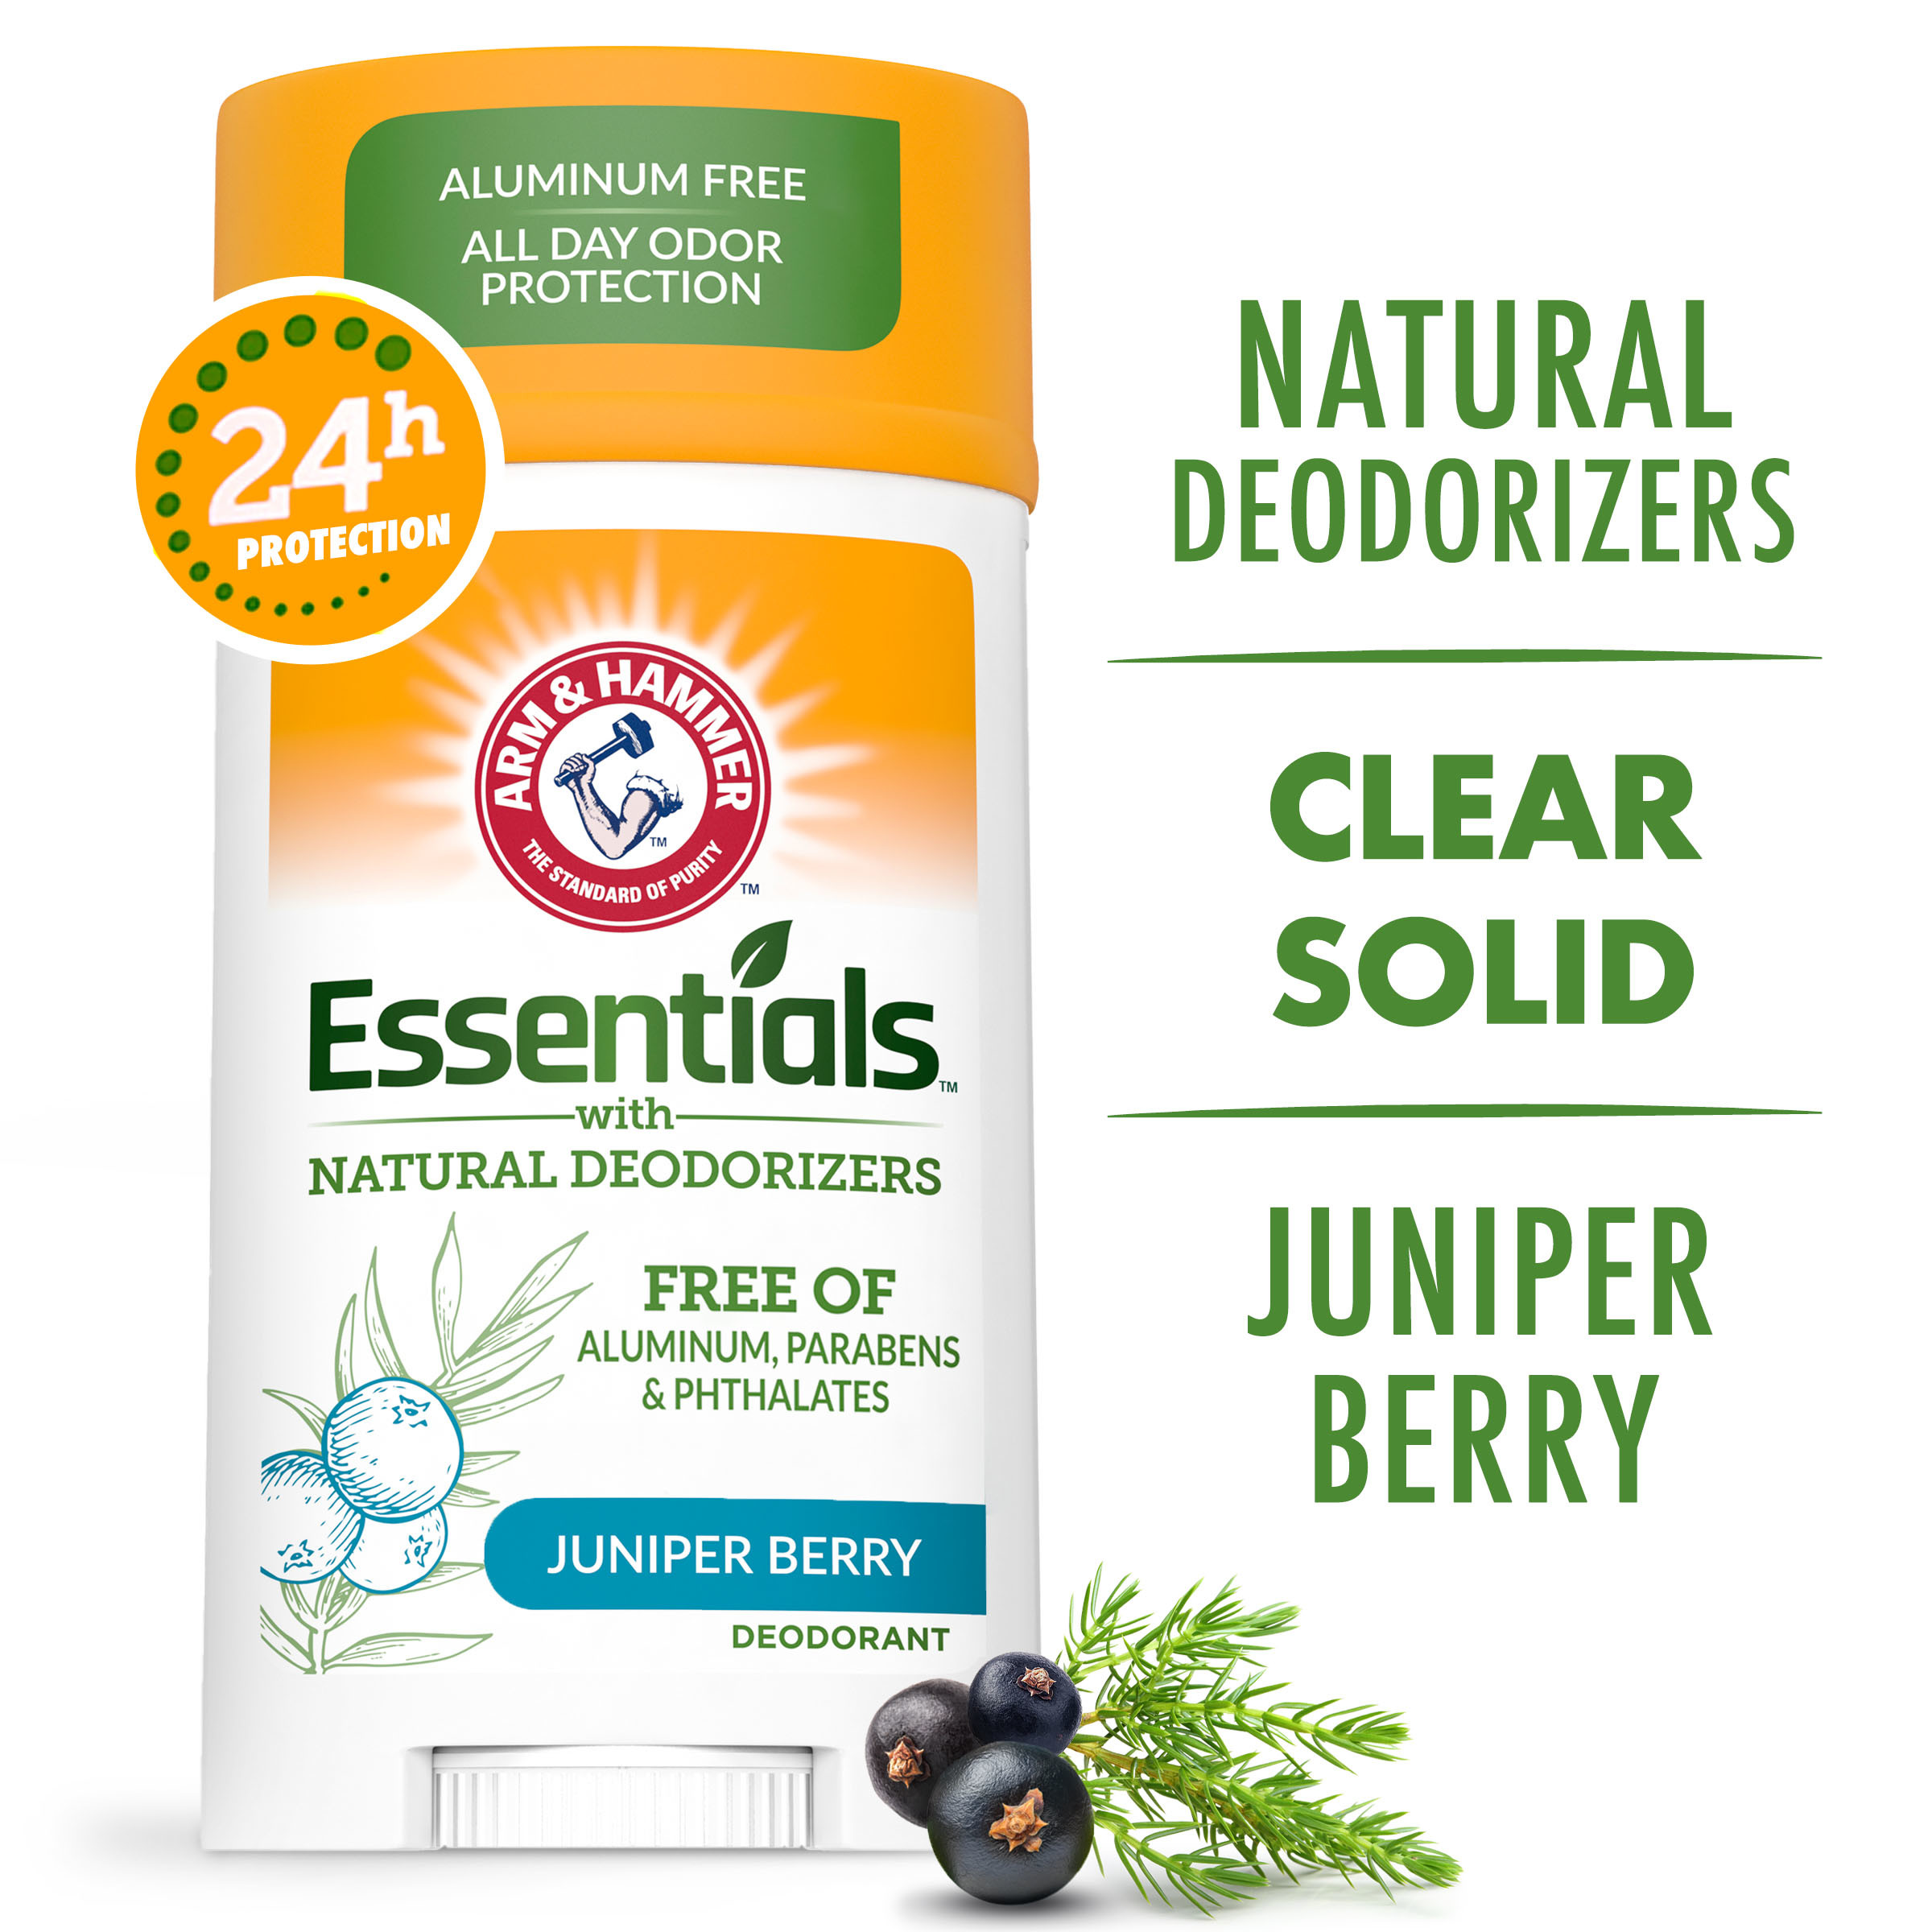 ARM & HAMMER Essentials Deodorant- Clean Juniper Berry- Wide Stick- 2.5oz- Made with Natural Deodorizers- Free From Aluminum, Parabens & Phthalates - image 1 of 8